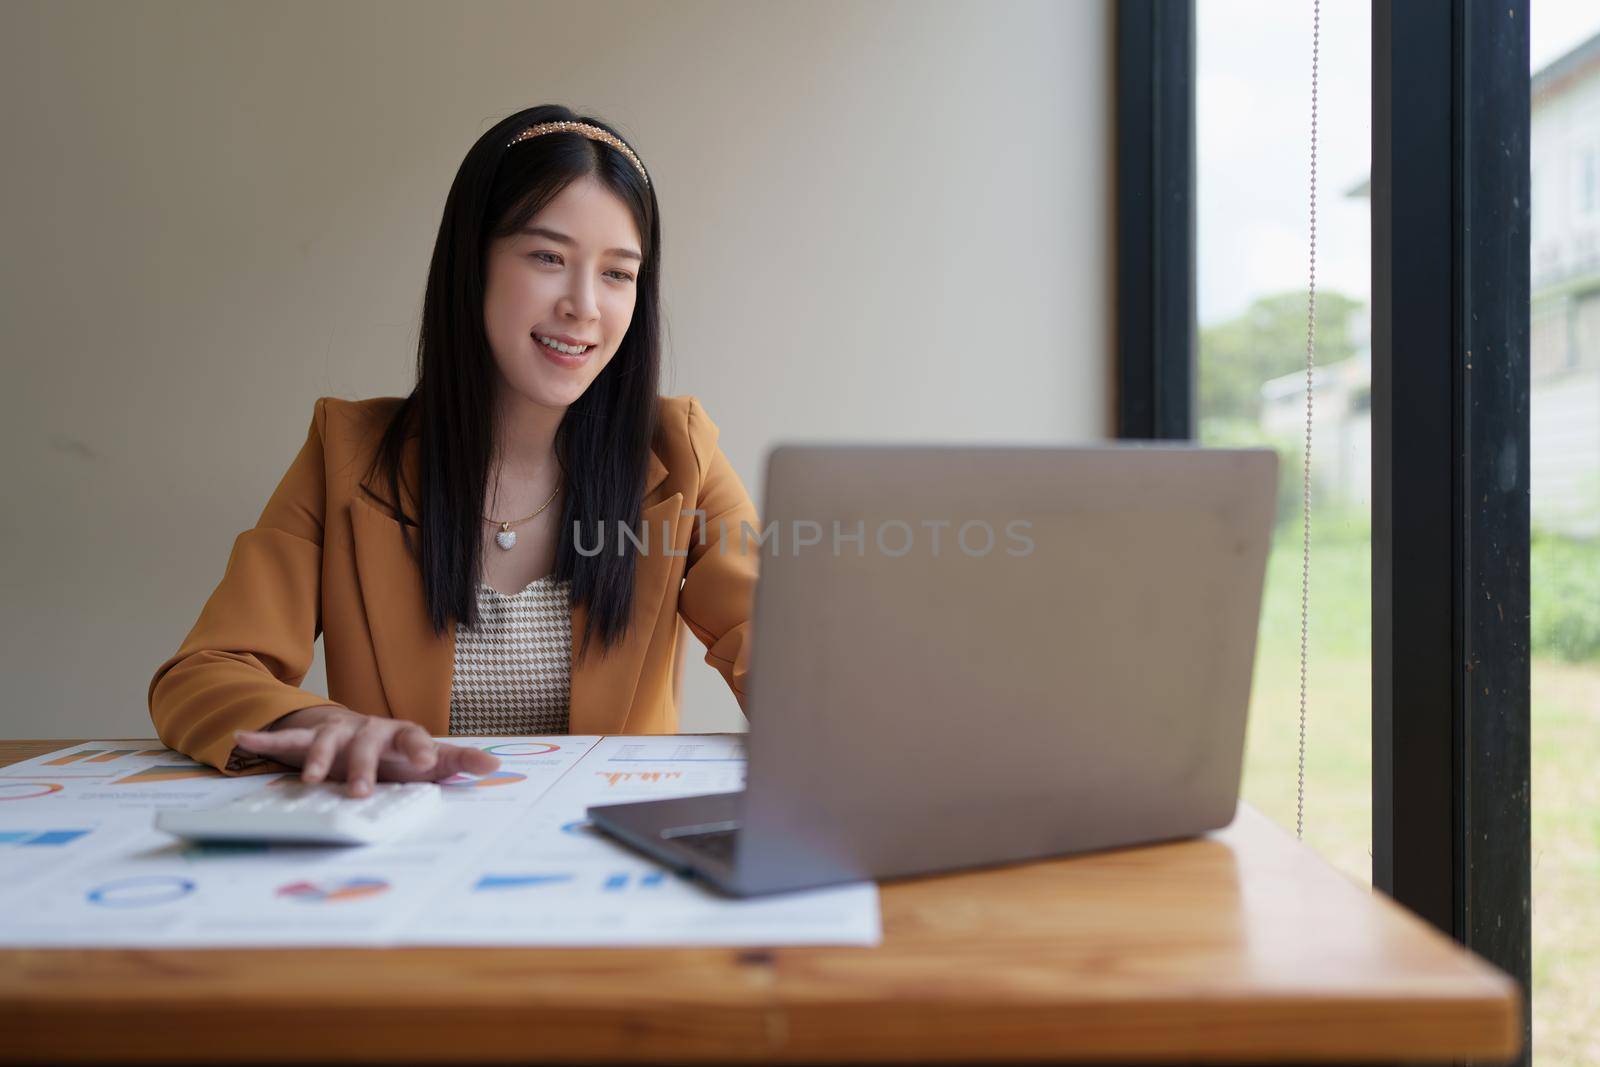 Fund investment concept. Business woman using finance application.